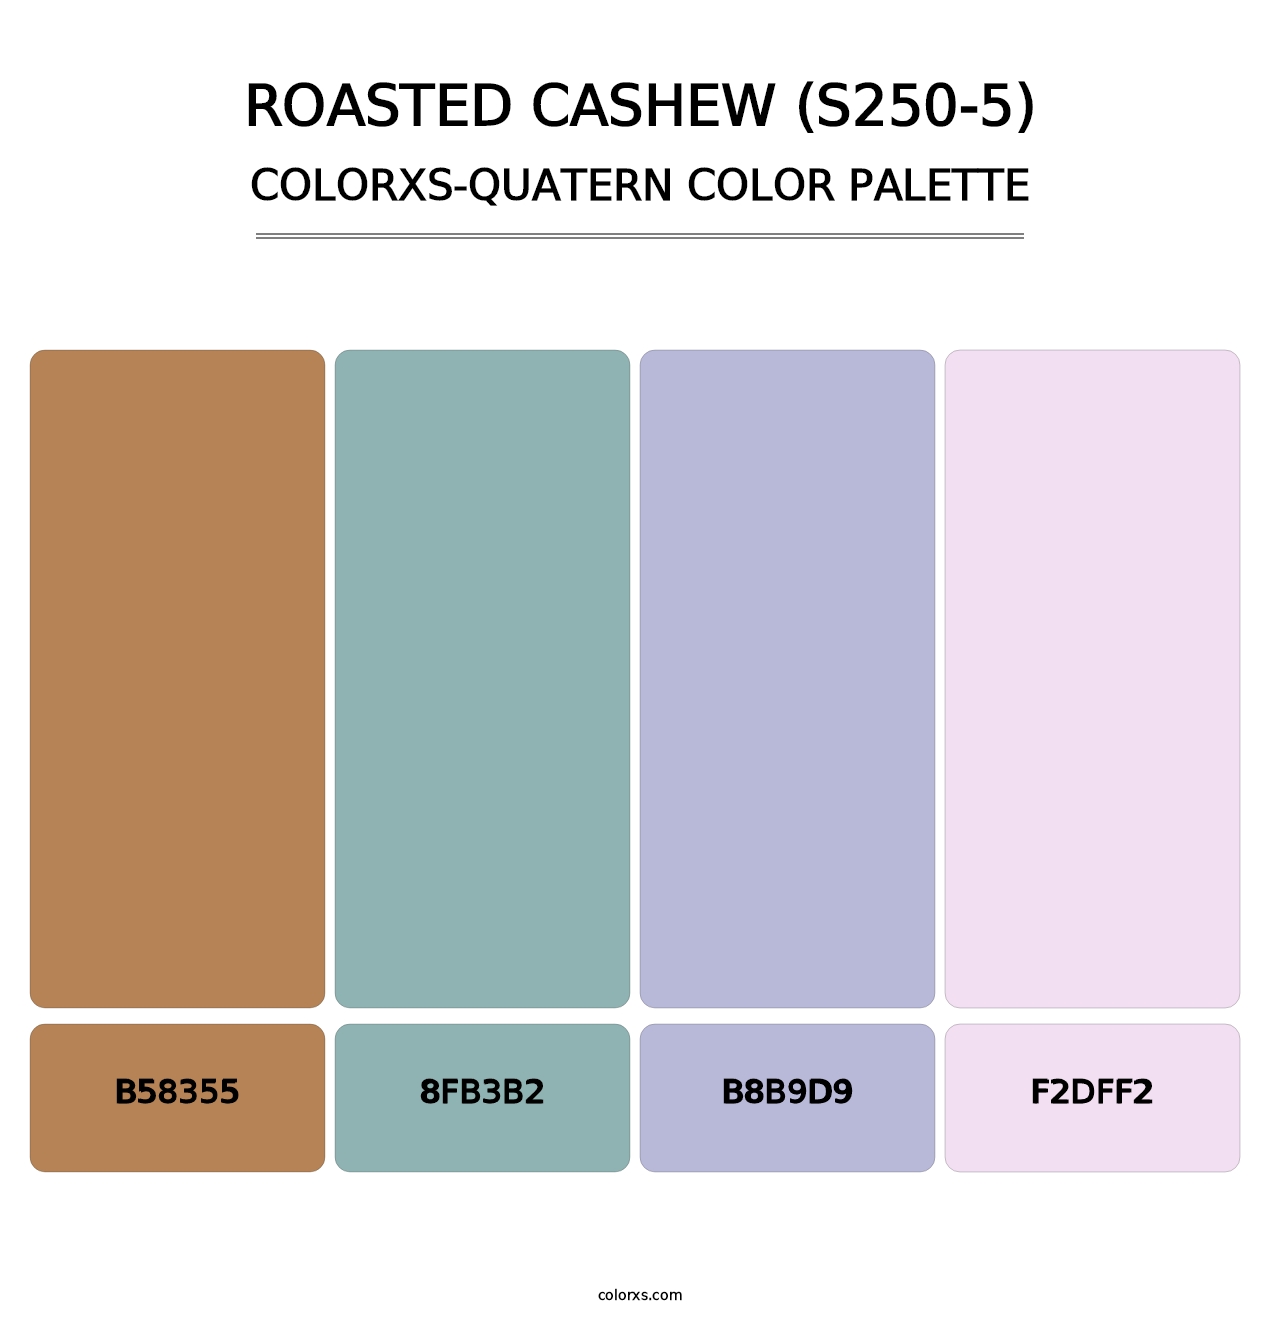 Roasted Cashew (S250-5) - Colorxs Quatern Palette